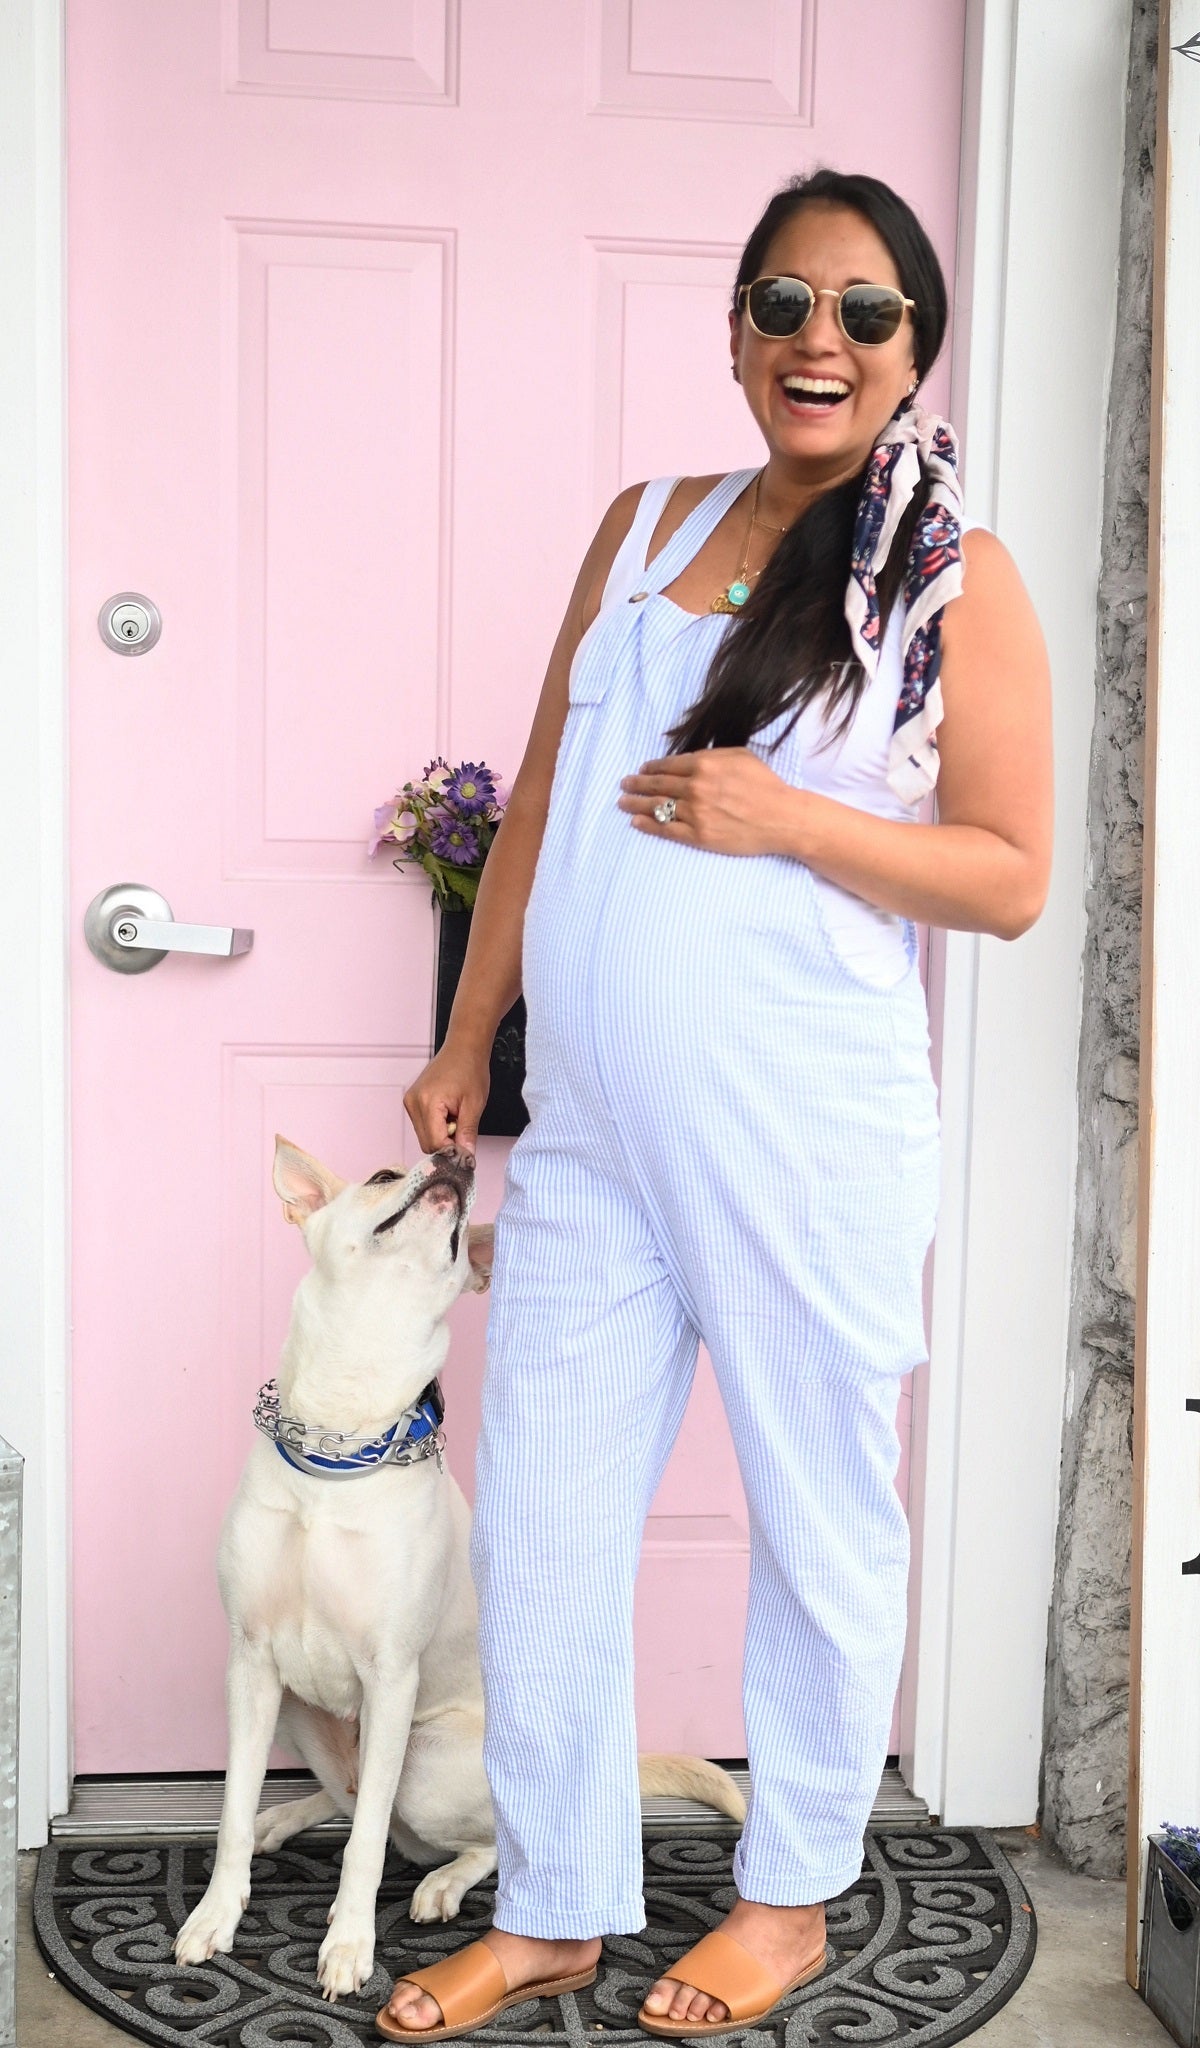 Royal Stripe Nani overall worn by pregnant woman standing in front of pink front door with one hand on her belly and dog sitting next to her sniffing her other hand.